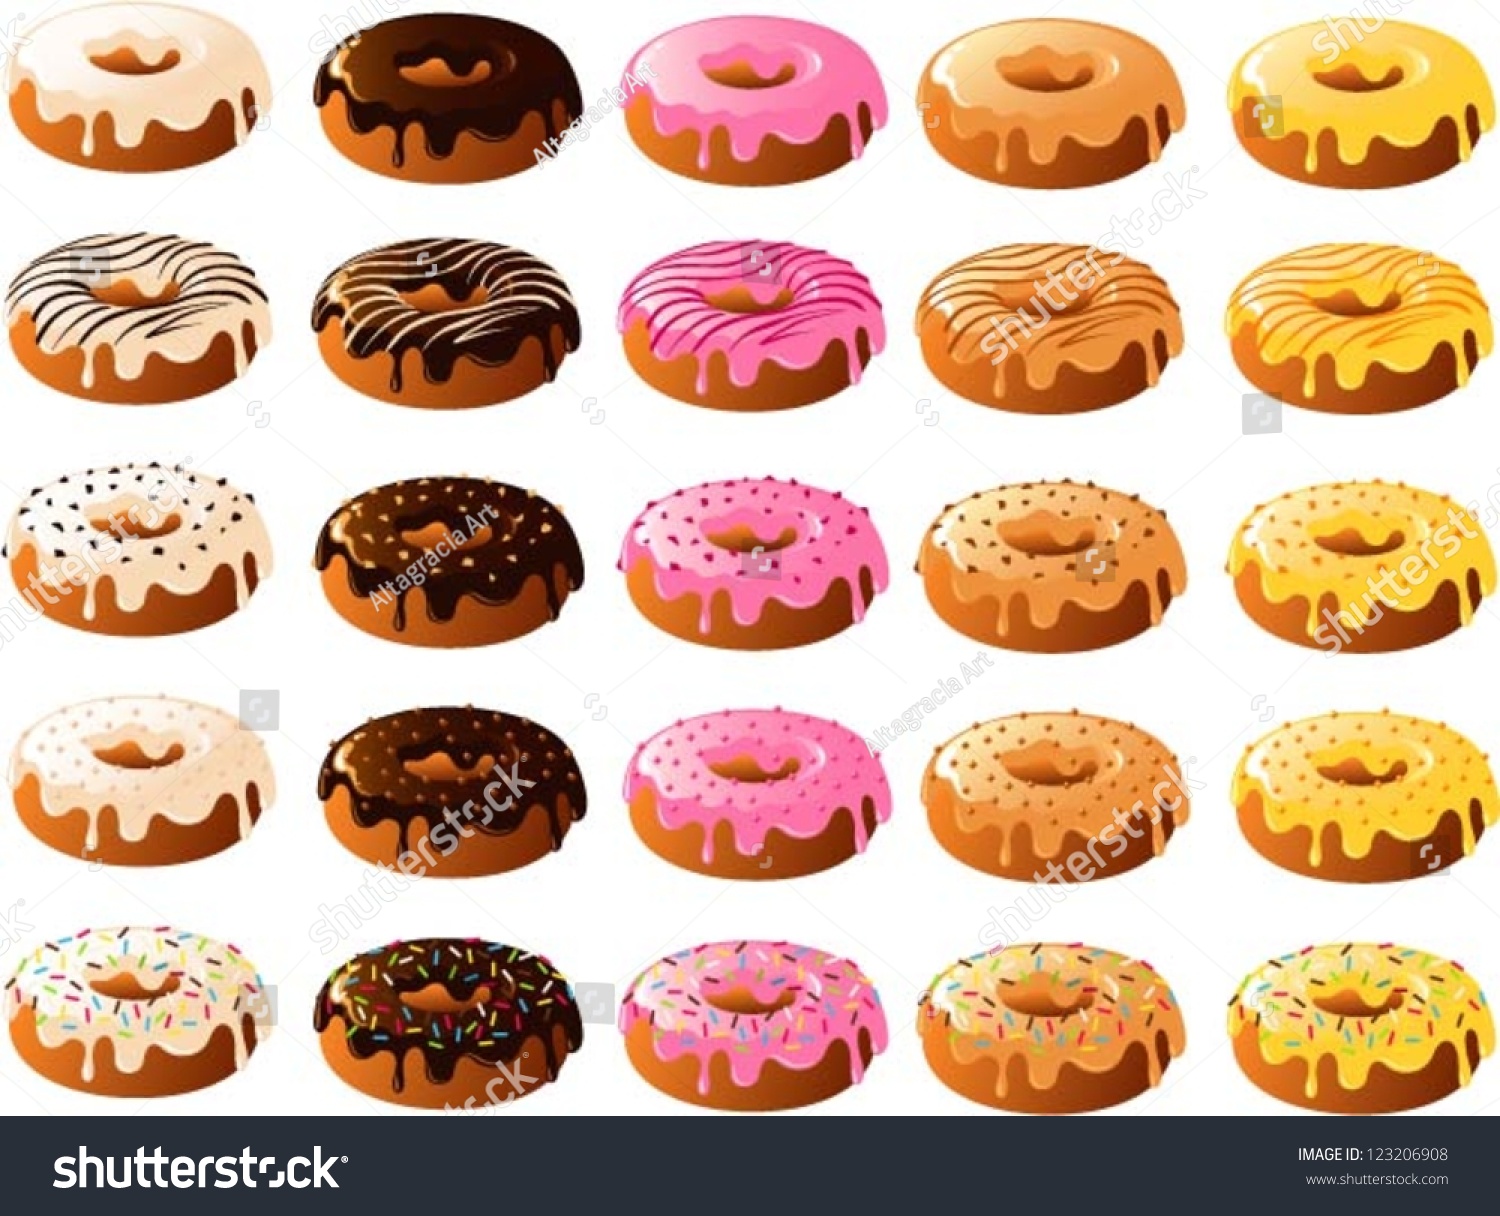 SVG of Vector illustration of donuts with various frostings and toppings. svg